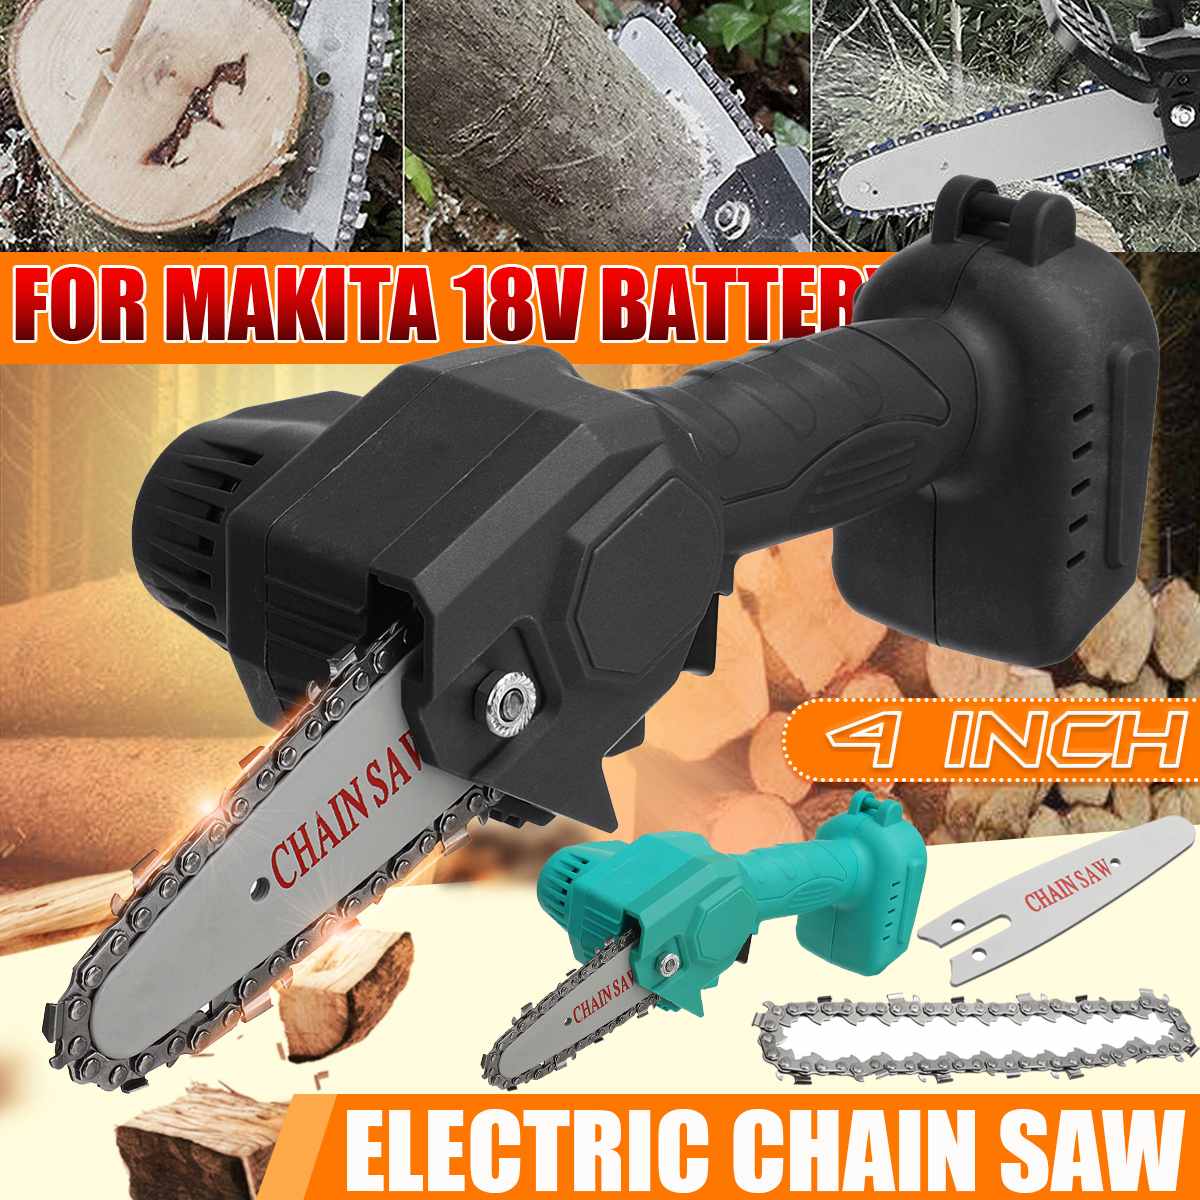 NEW 4 Inch Cordless Electric Chain Saw Brushless Motor Power Tools Chainsaw Garden Woodwork Power Blade For 18V Makita Battery